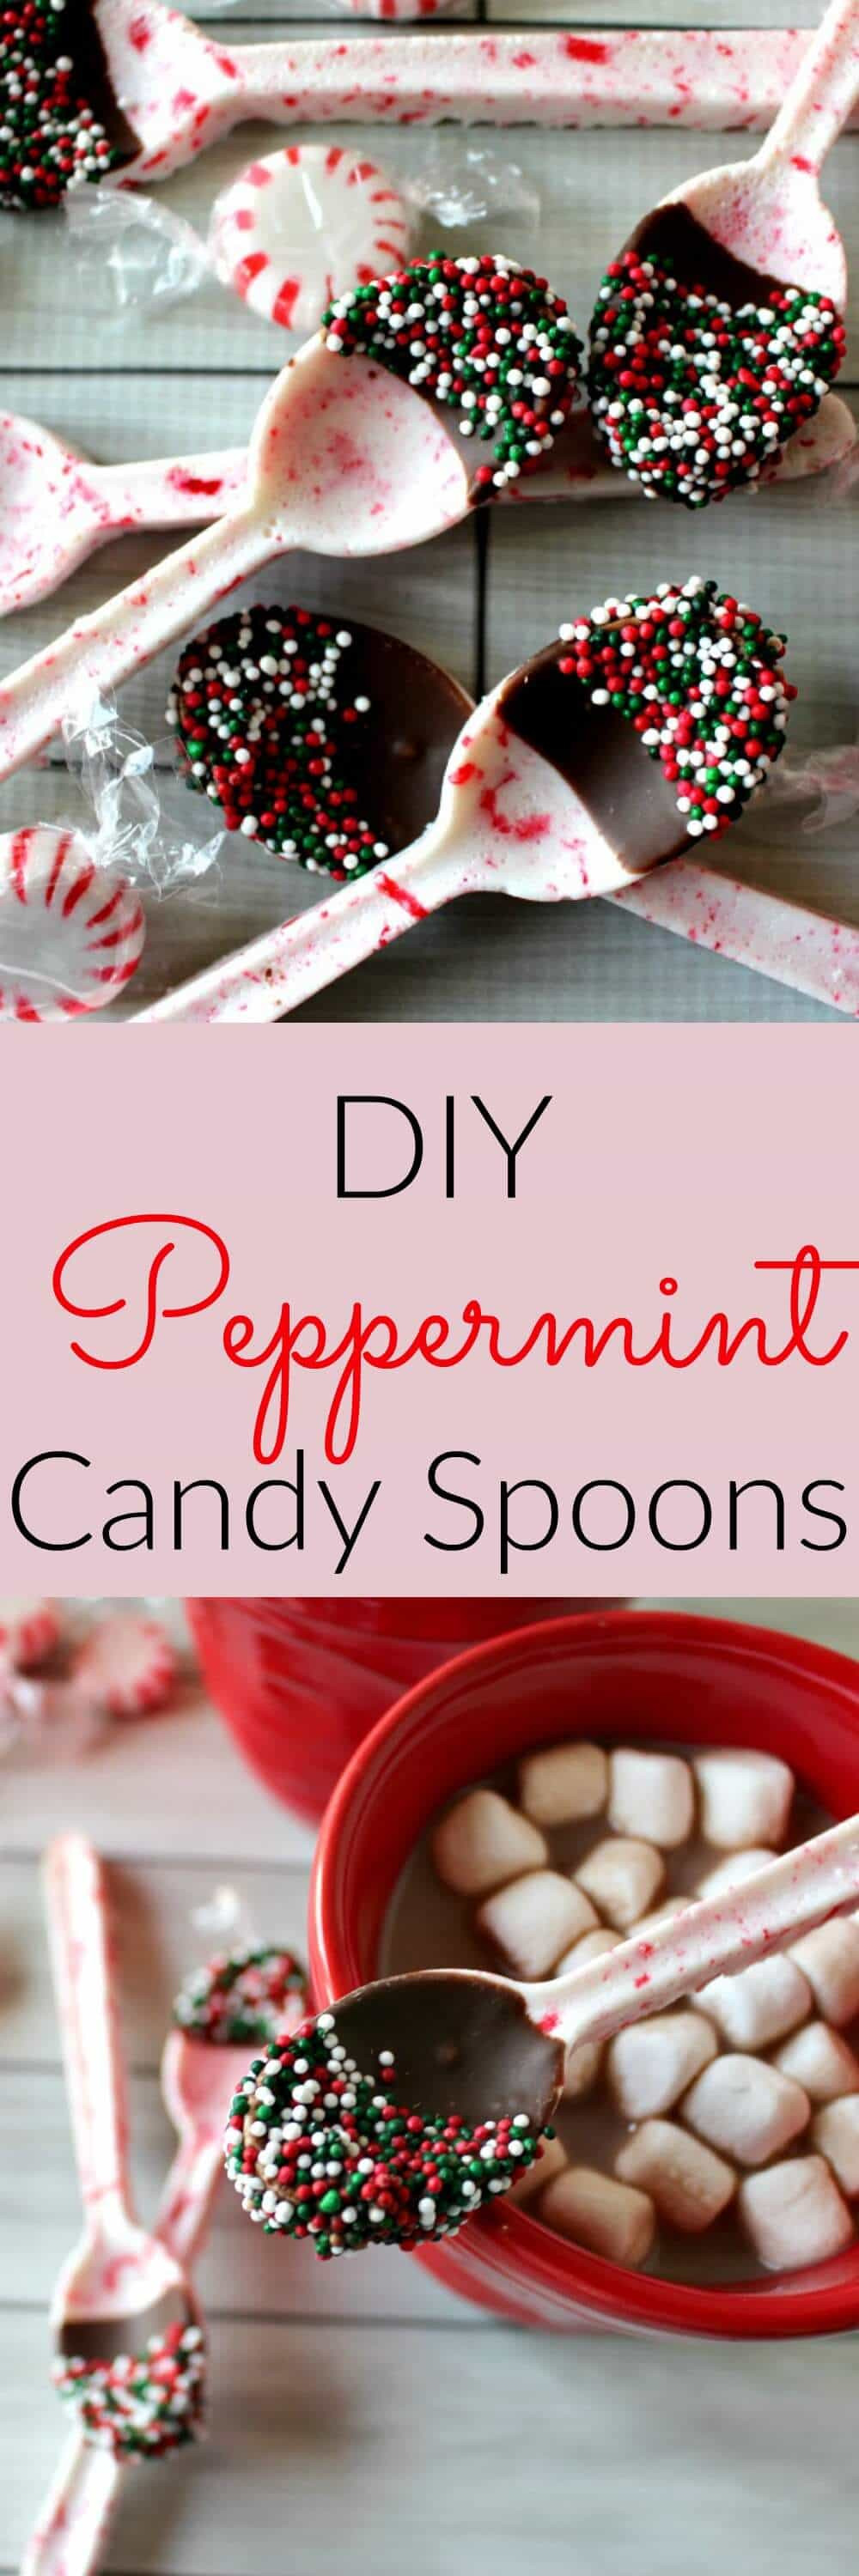 DIY Gift For Christmas
 DIY Peppermint Candy Spoons Princess Pinky Girl